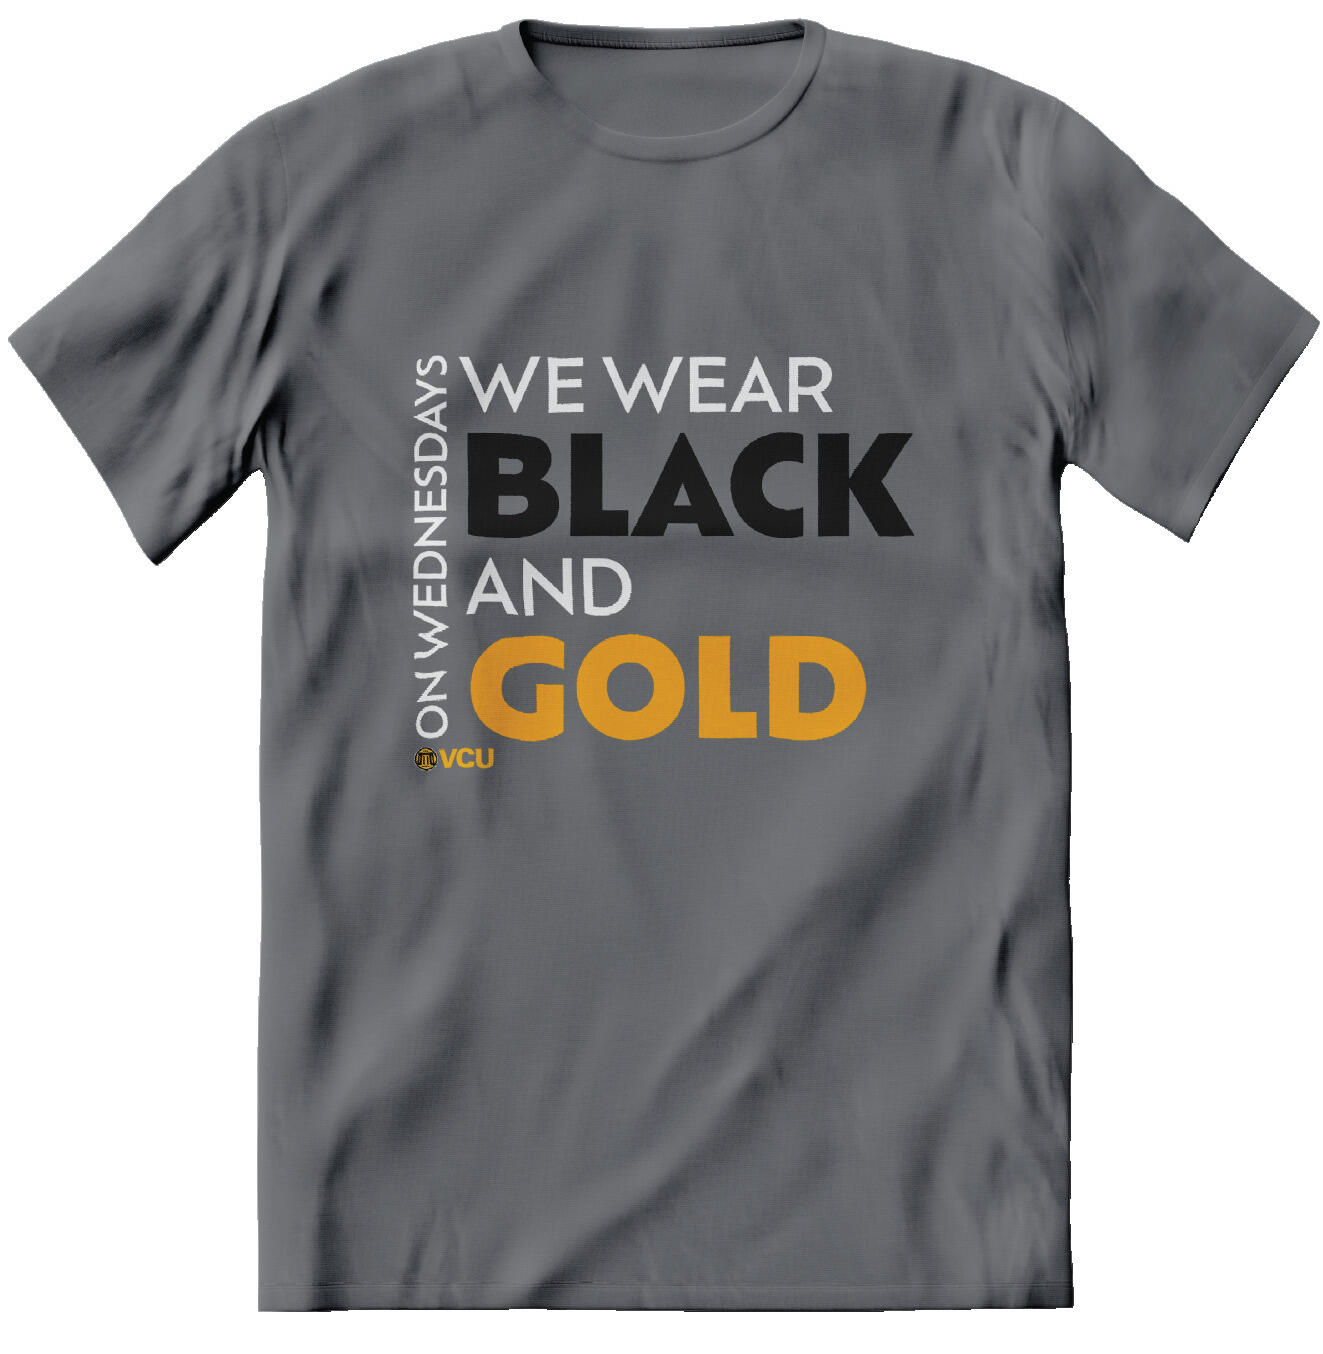 A gray t-shirt with white, black, and yellow text that reads \"WE WEAR BLACK AND GOLD ON WEDNESDAYS VCU\" 